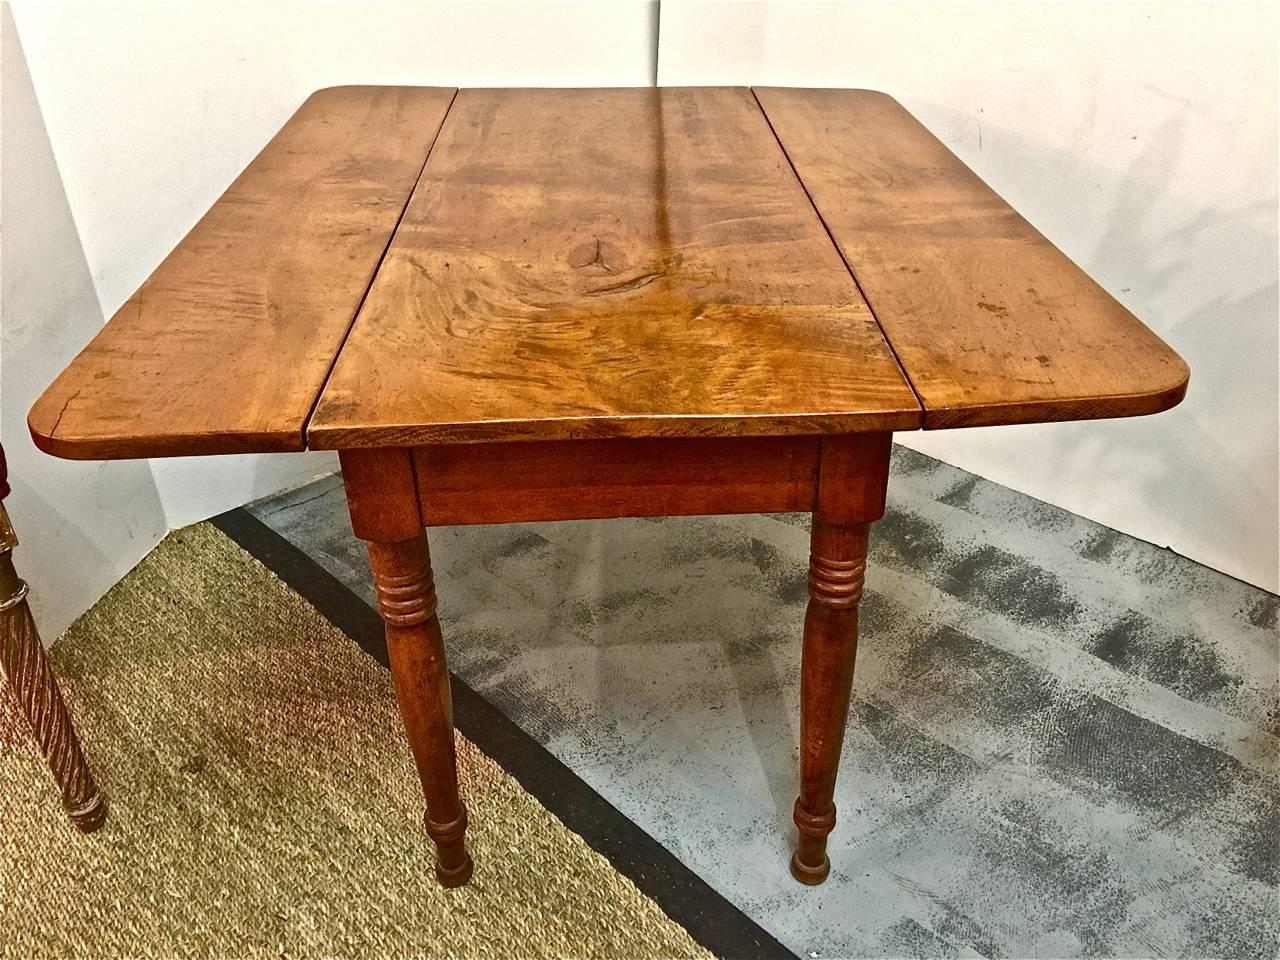 This is a unique example of an American late Federal or early Sheraton child's drop-leaf table, circa 1820-1830, in beautifully figured maple. The legs are beautifully turned and the drop side display shaped edges.

The table retains an old, if